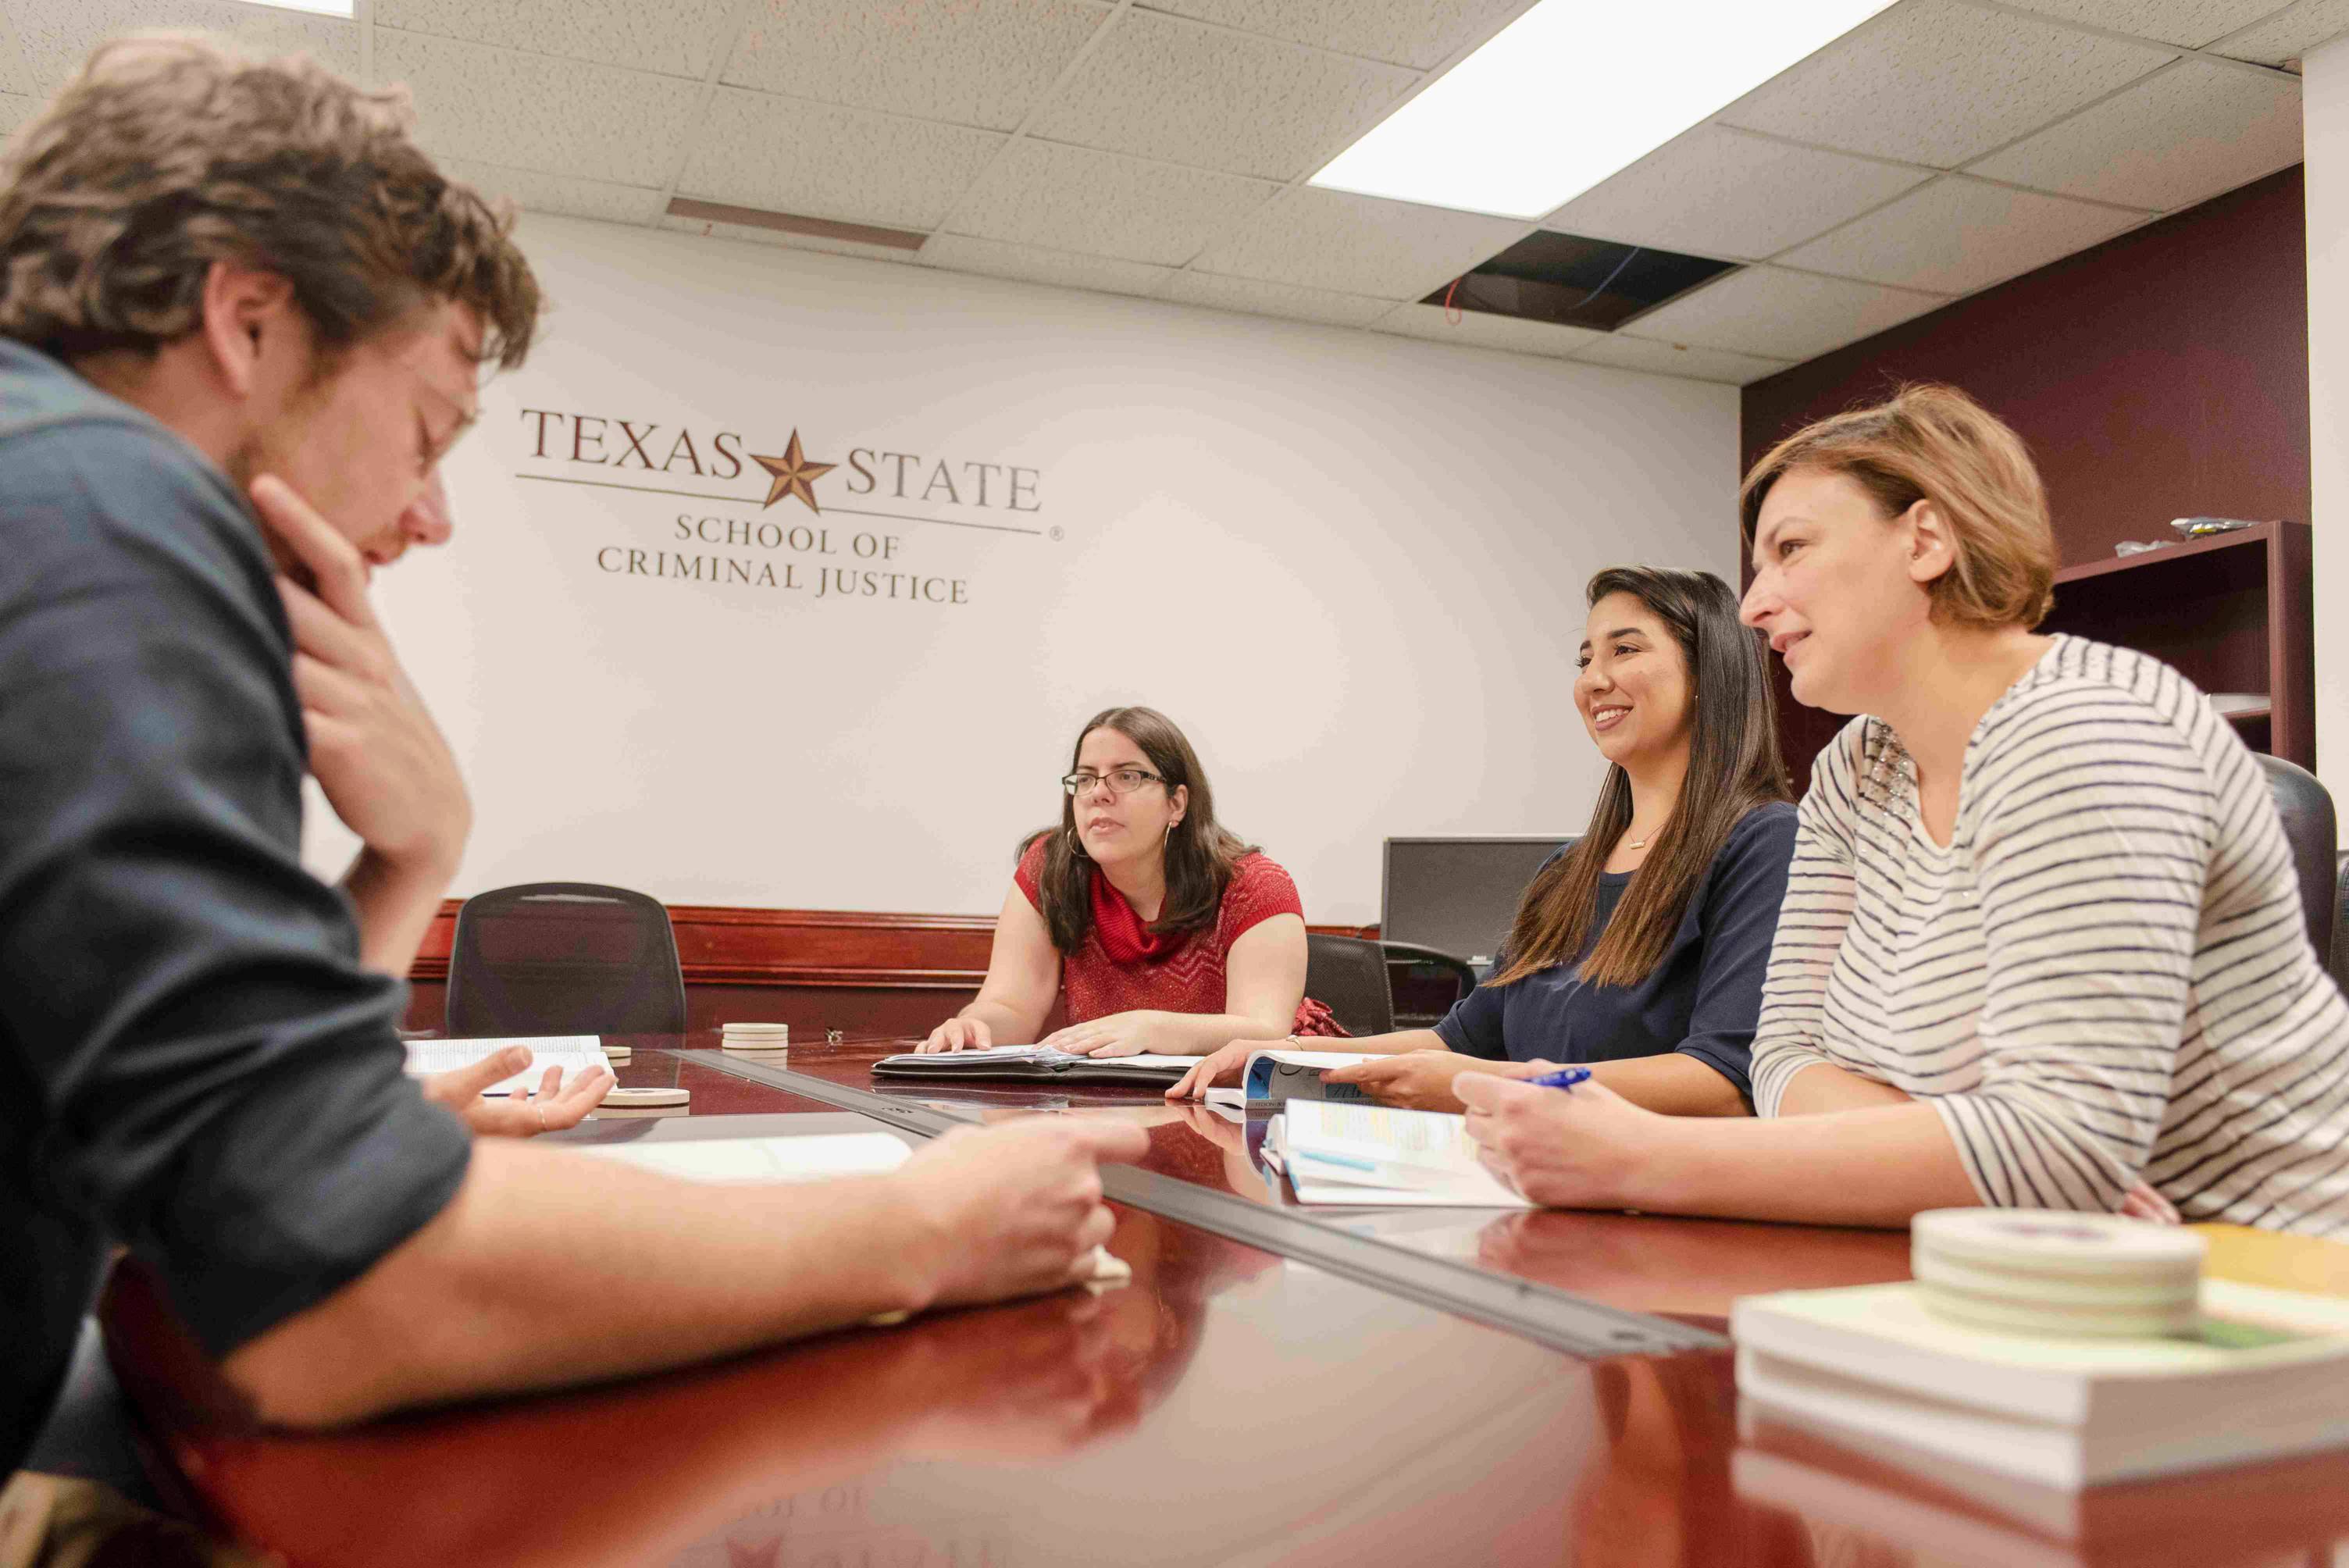 staff and students sit around a table to talk with the texas state university logo on a wall behind them